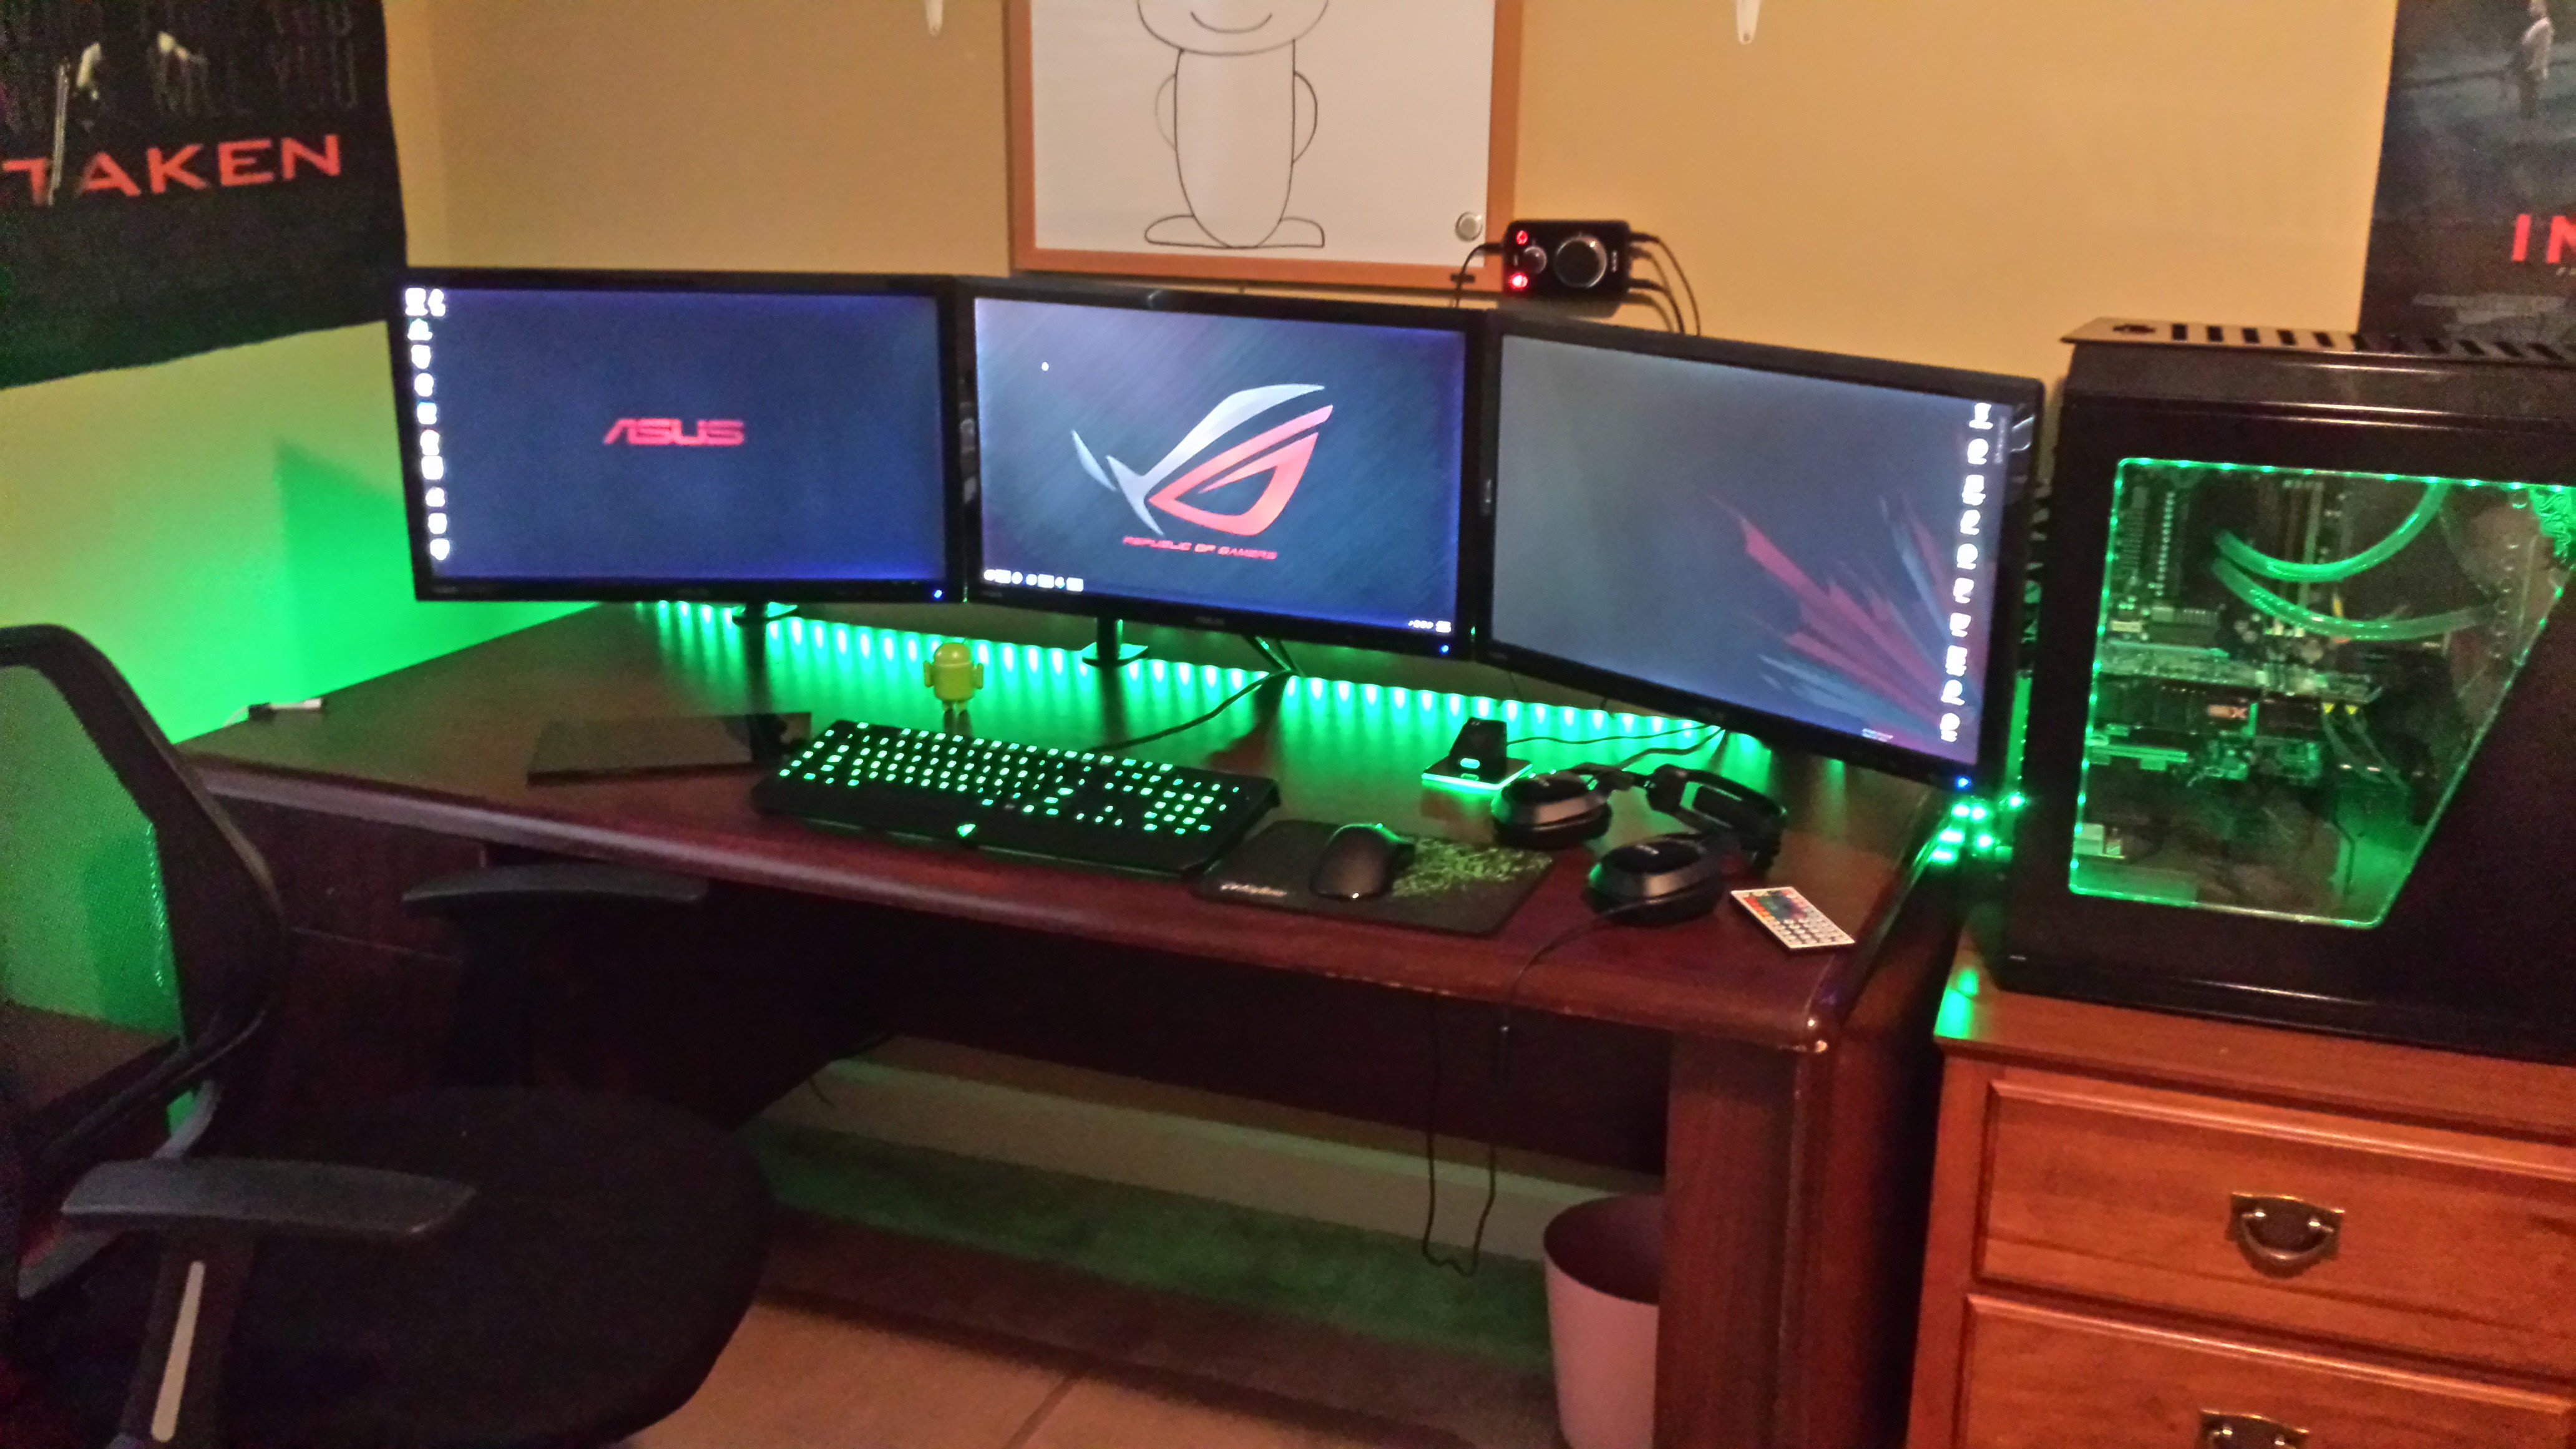 Simple How To Make A Good Laptop Gaming Setup in Bedroom